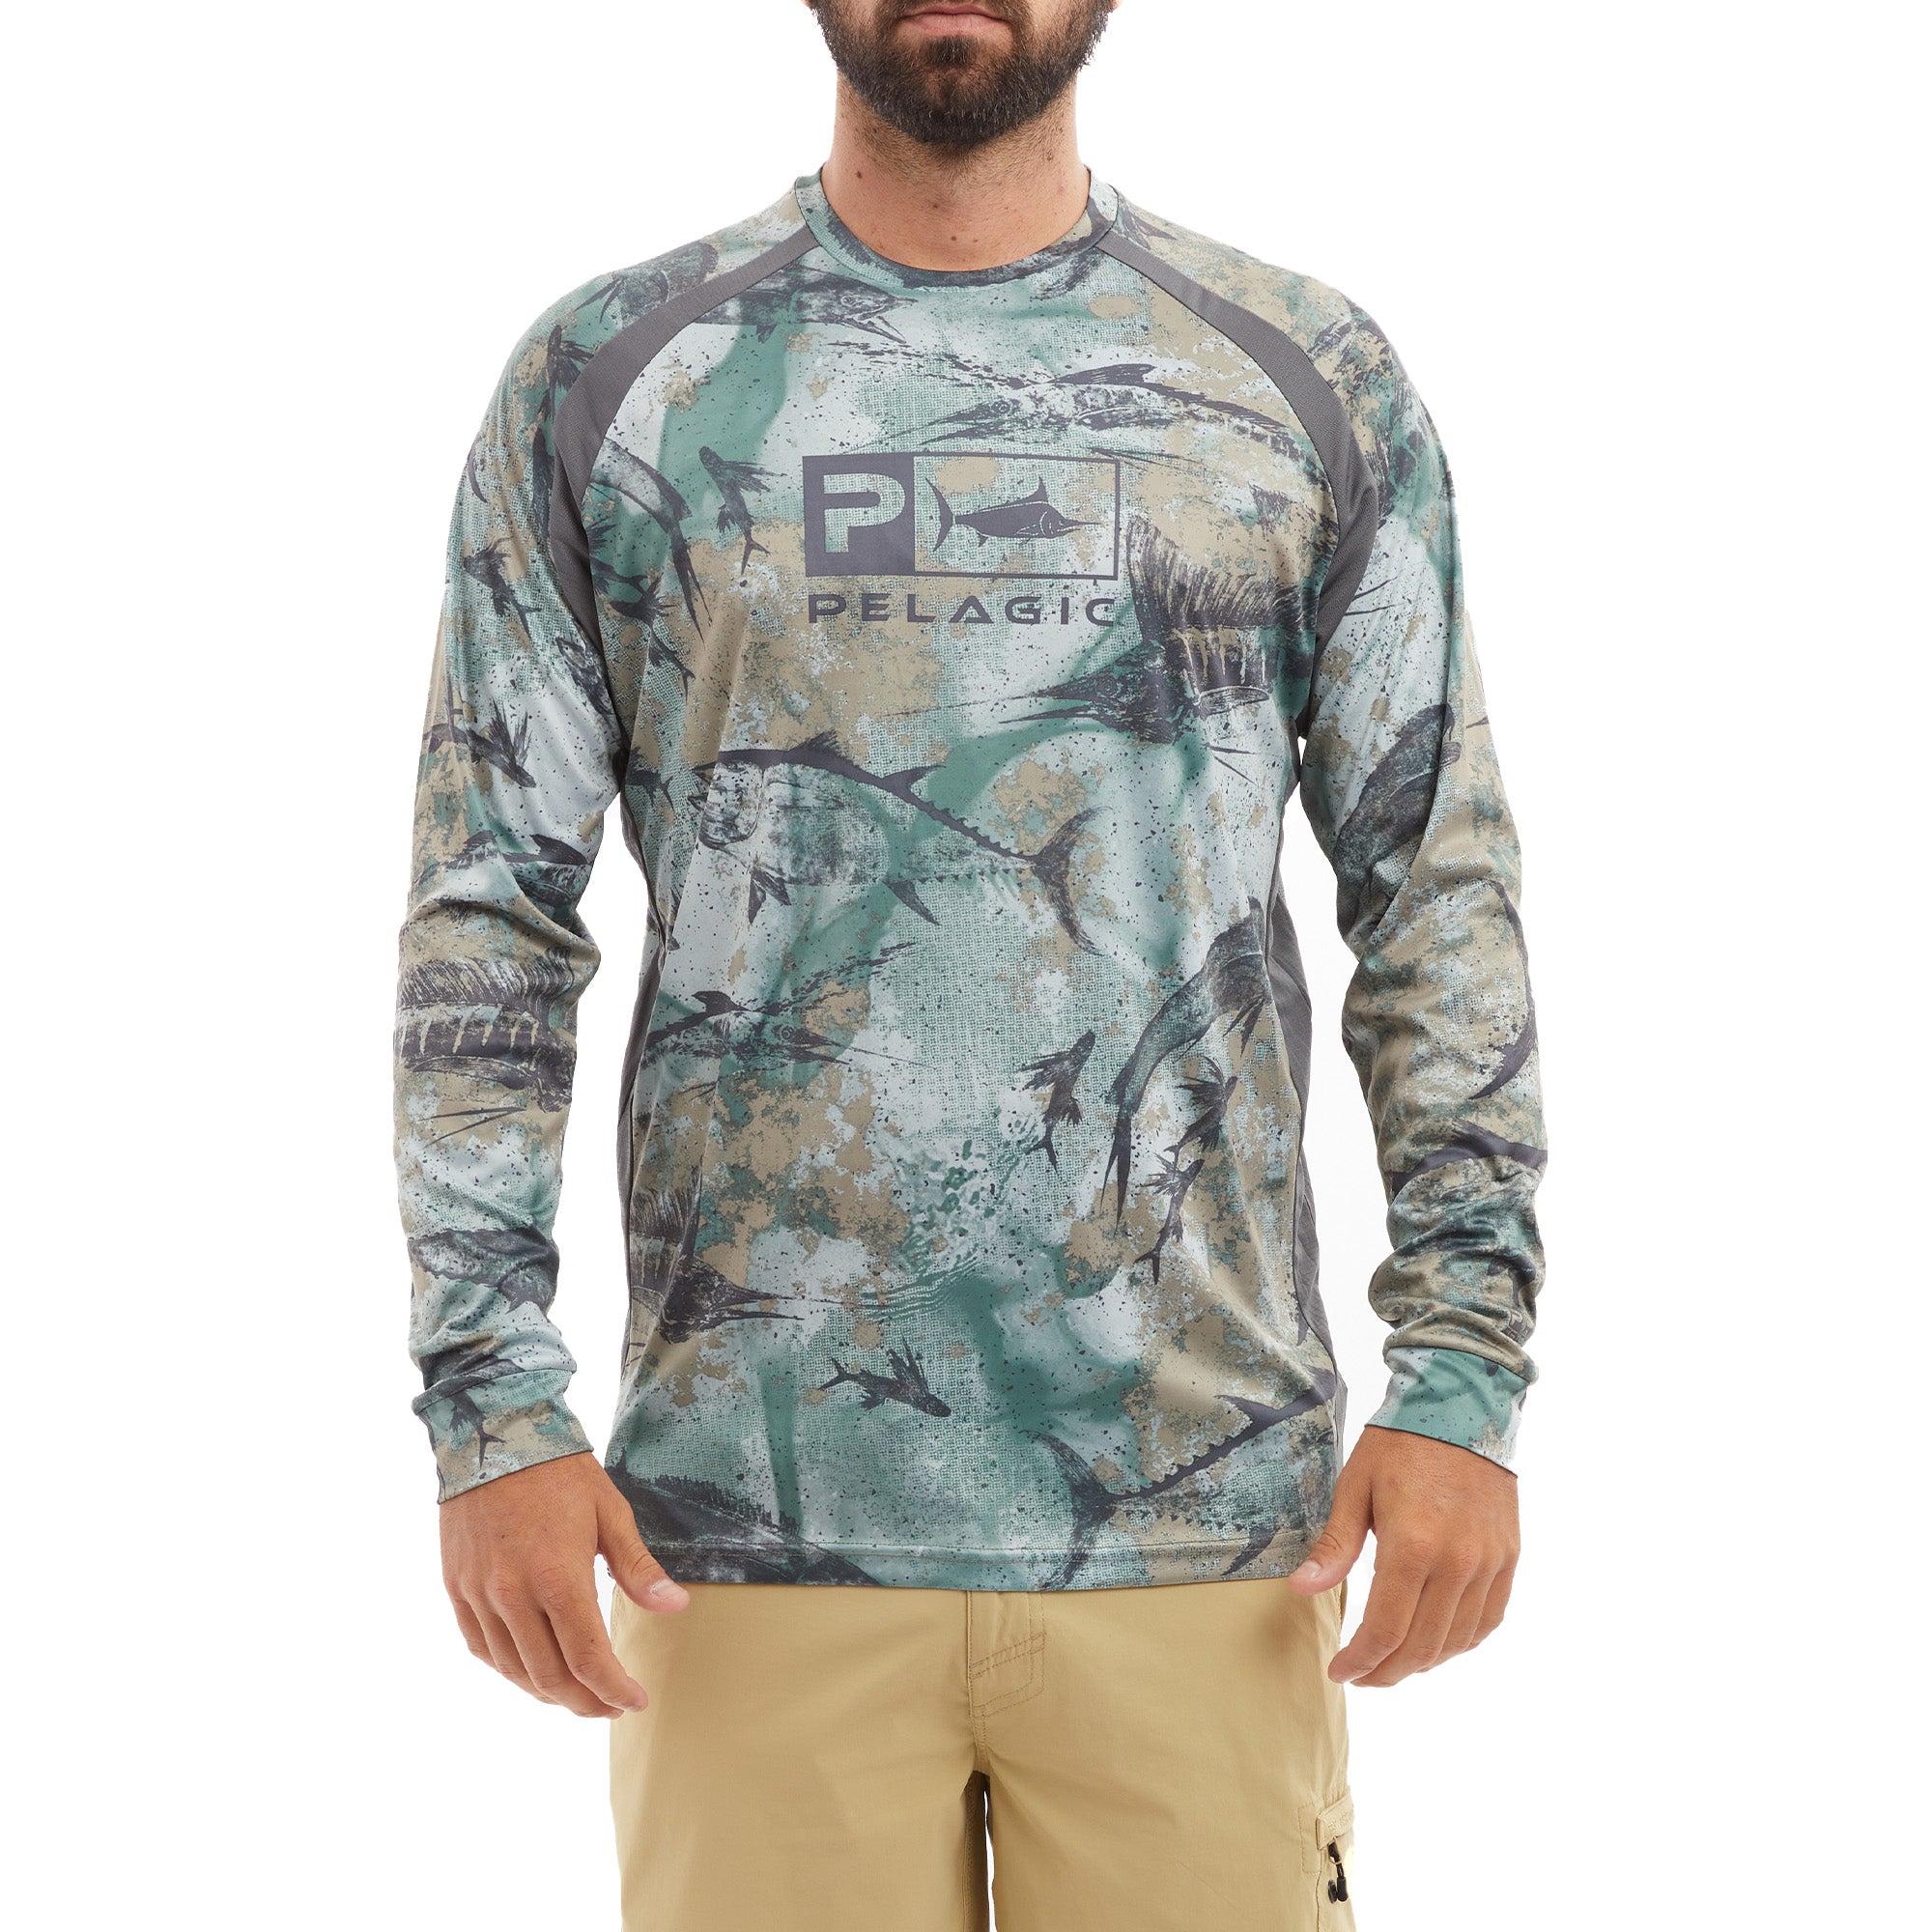 Long Sleeve For Men Men's Outdoor Quick-drying Camouflage Long Sleeves Tops  Blouse T-Shirts Army Green L 